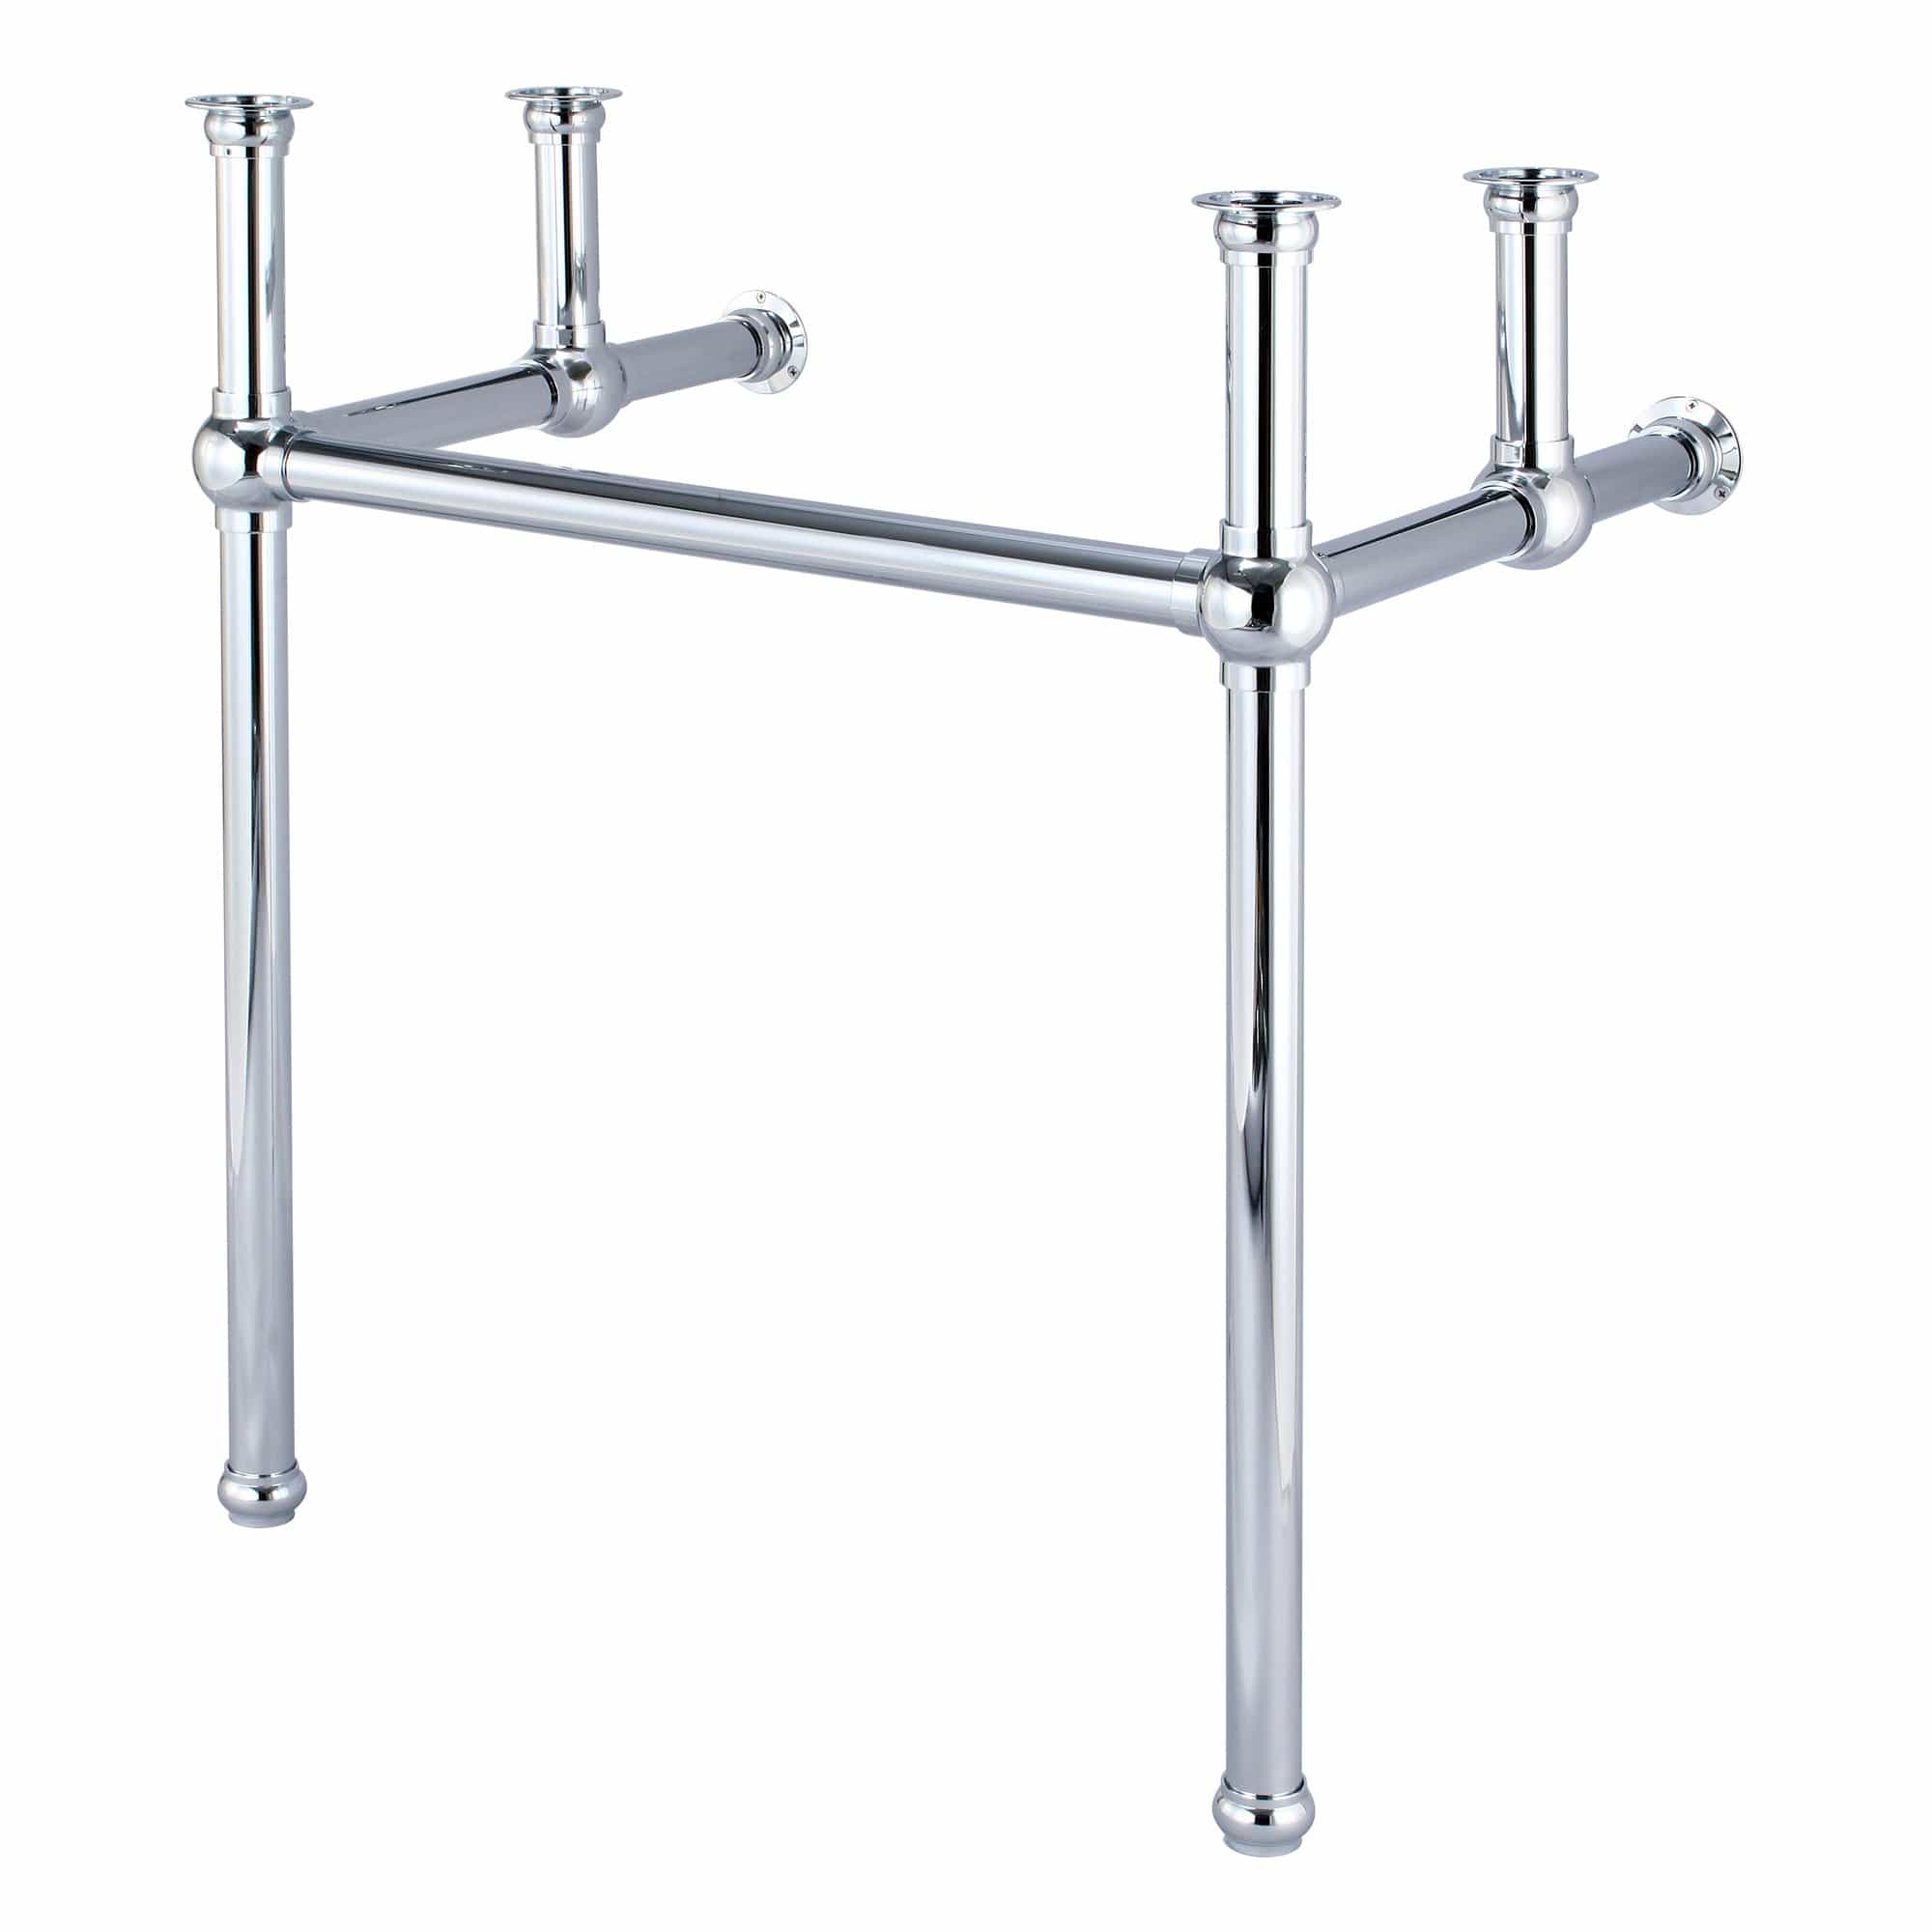 Water Creation Embassy 30 Inch Wide Single Wash Stand Only in Chrome Finish - Molaix732030757622Wash StandEB30A-0100